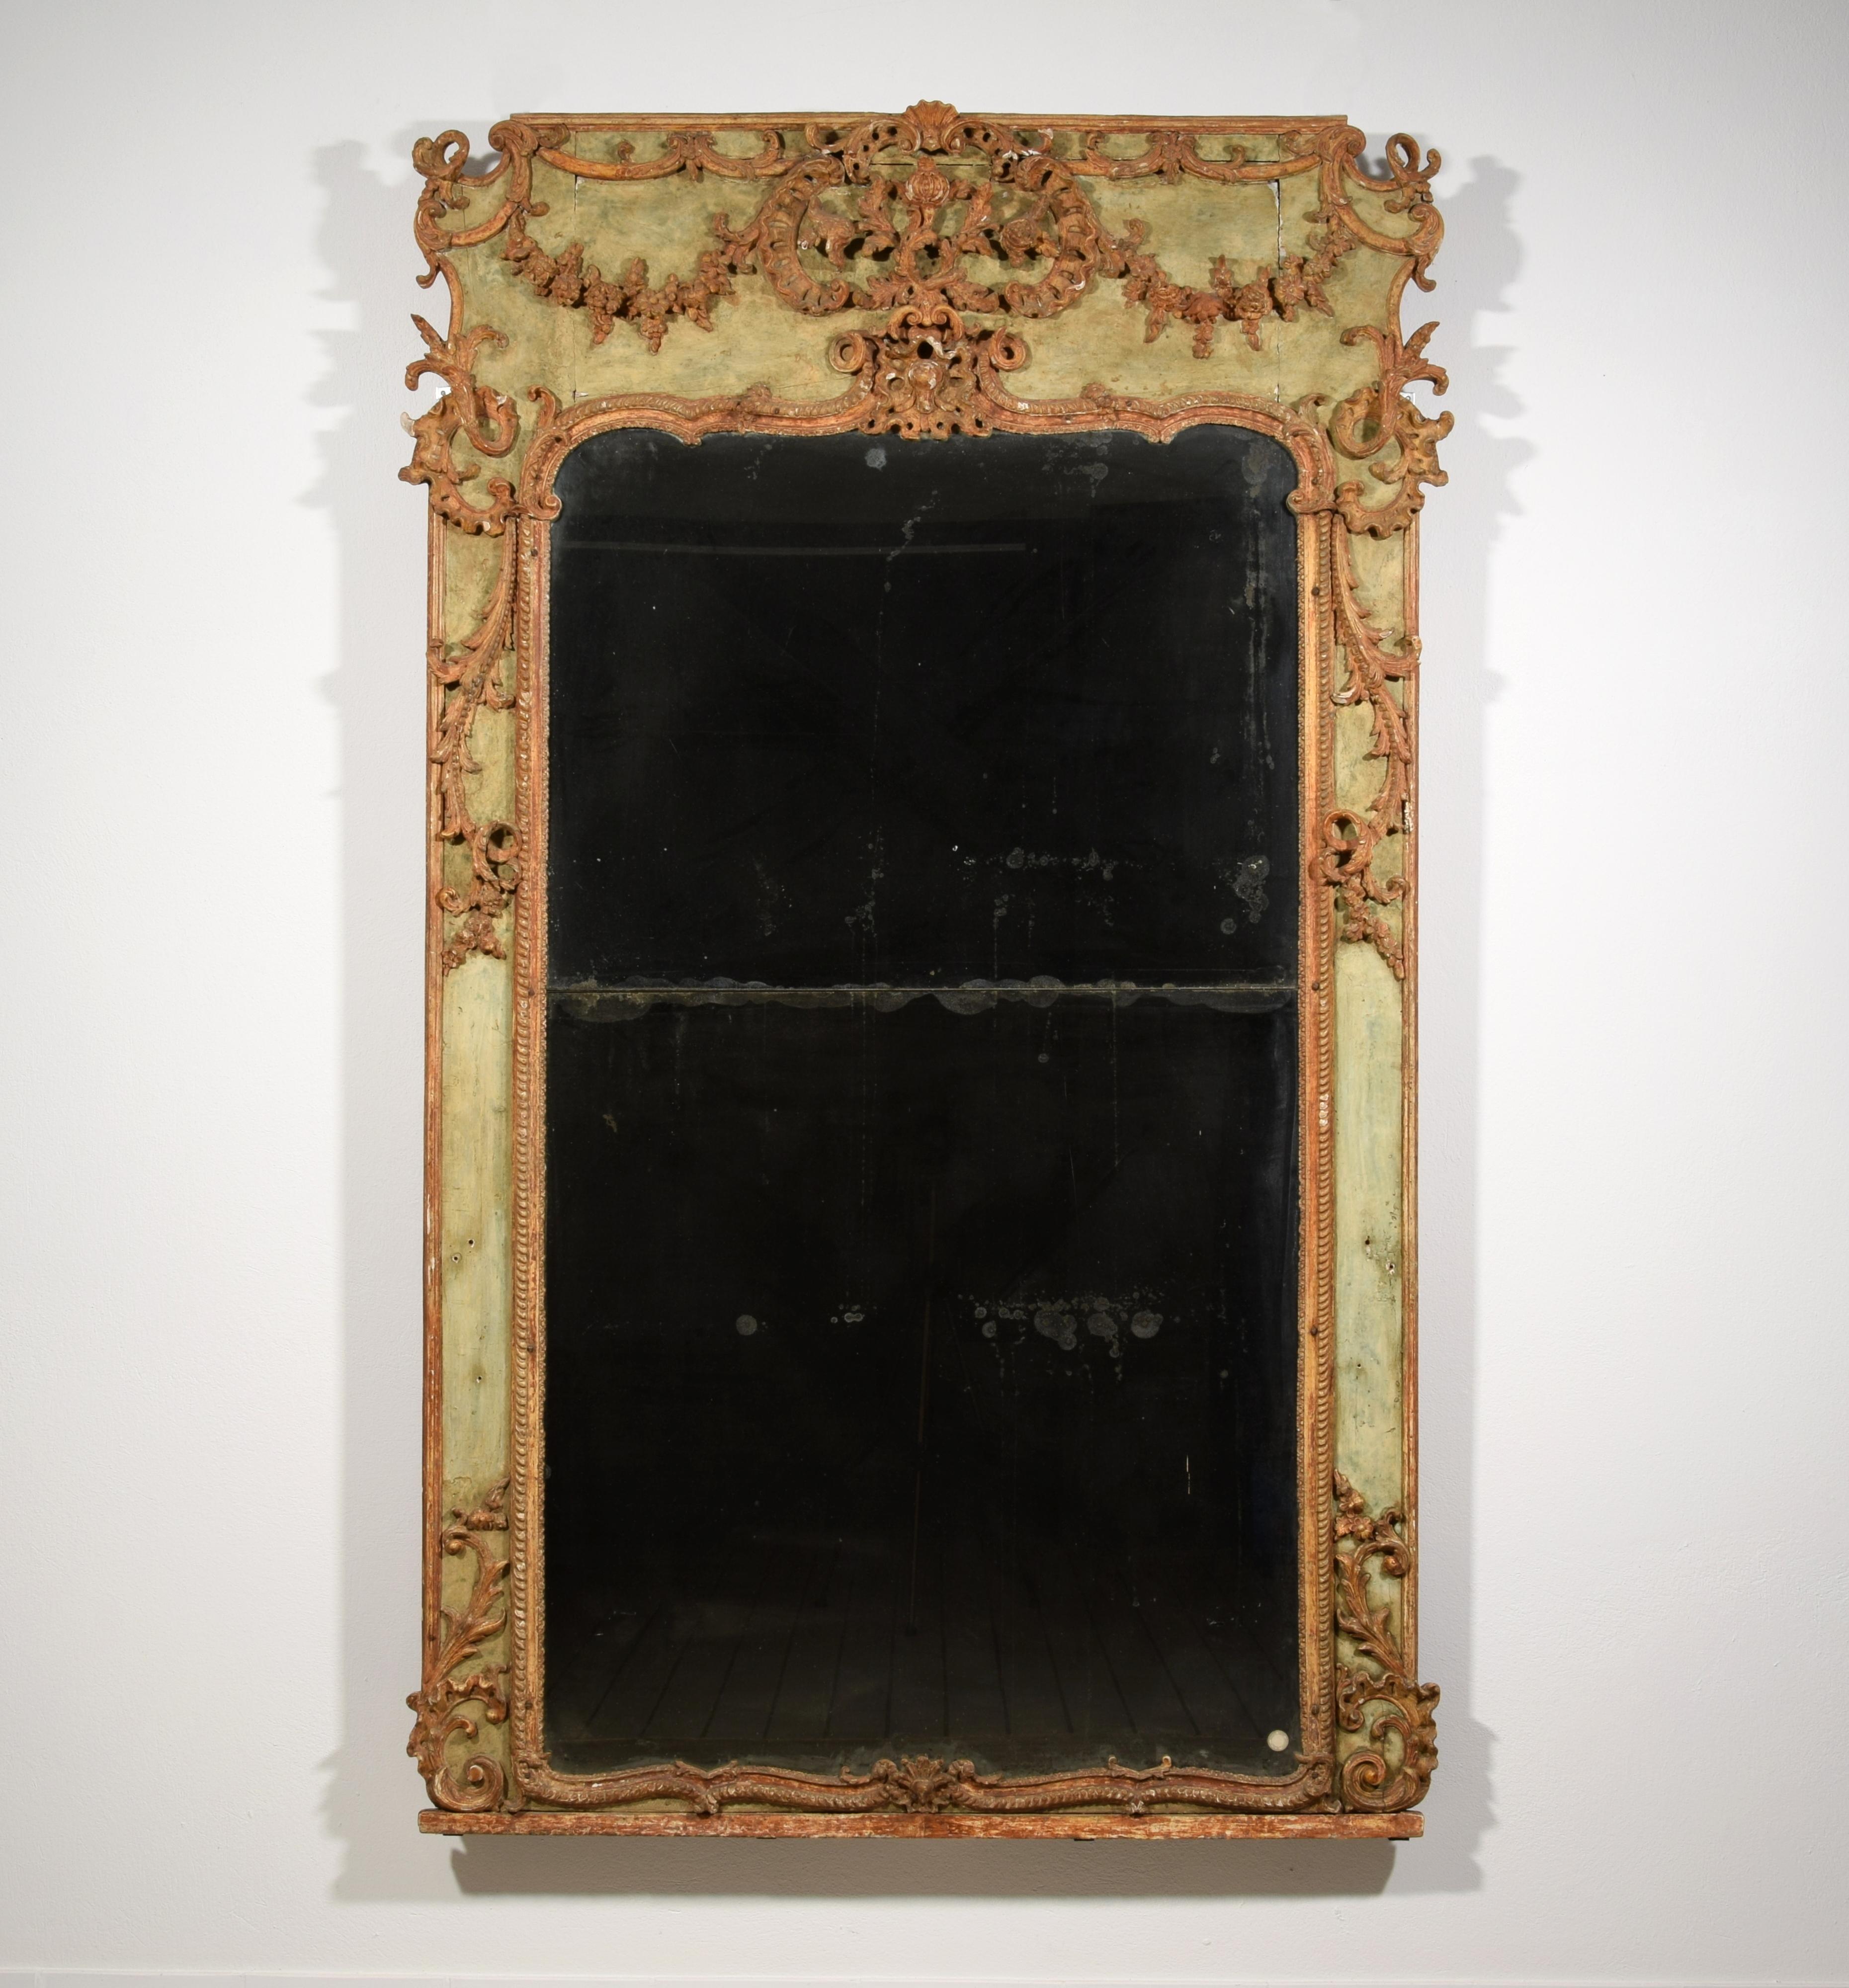 18th Century, Large Italian Baroque Wood and Plaster Lacquered Mirror

This large and refined mirror was made in Piedmont, Italy, around the middle of the eighteenth century.
Of quadrangular shape, the frame is in wood with ornate plaster